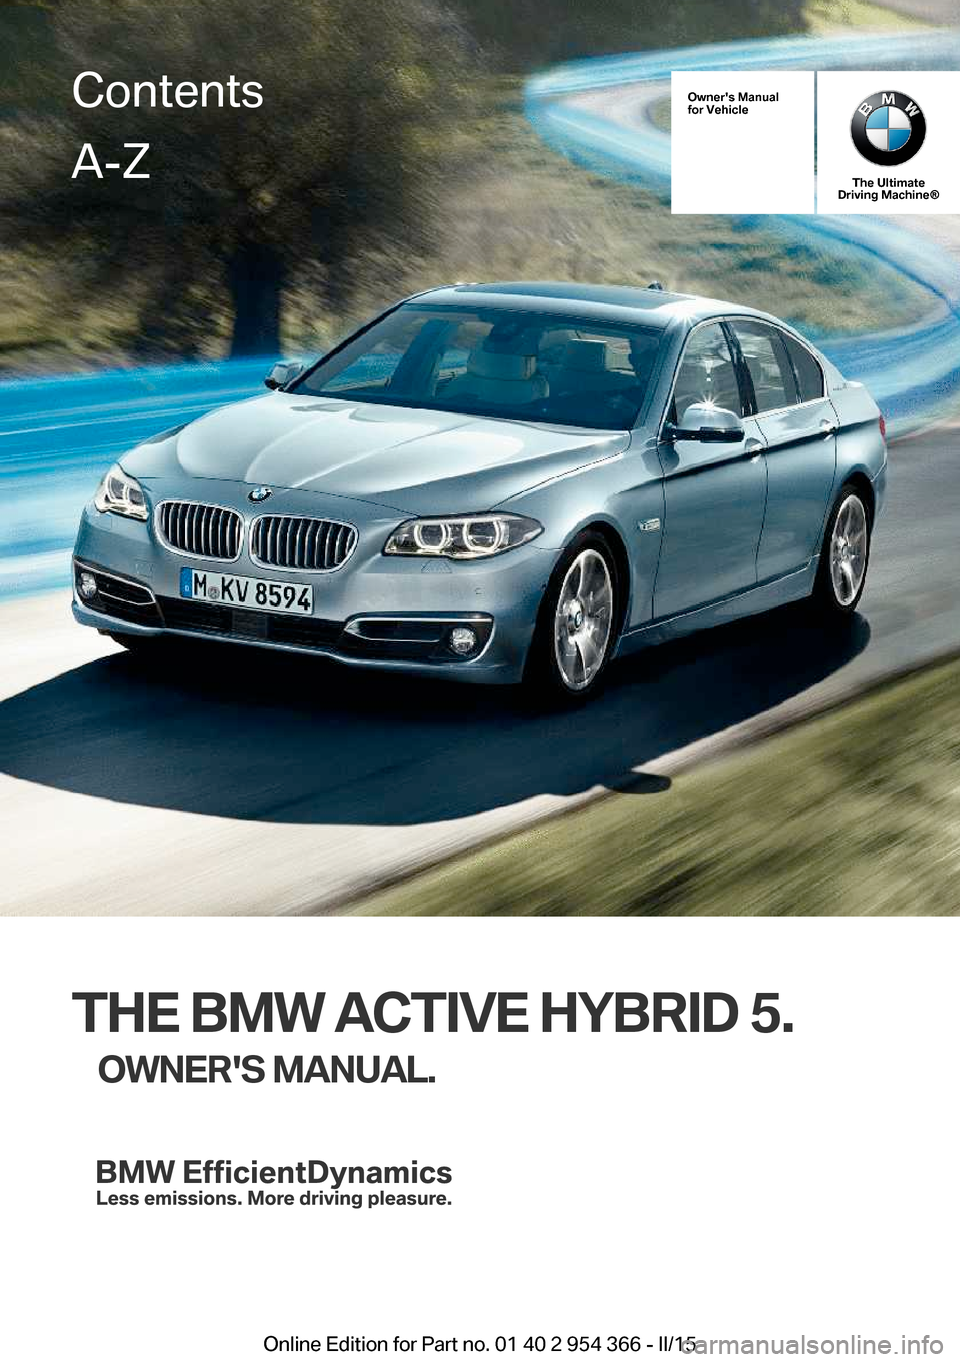 BMW ACTIVE HYBRID 5 2015 F10H Owners Manual Owners Manual
for Vehicle
The Ultimate
Driving Machine®
THE BMW ACTIVE HYBRID 5.
OWNERS MANUAL.
ContentsA-Z
Online Edition for Part no. 01 40 2 954 366 - II/15   